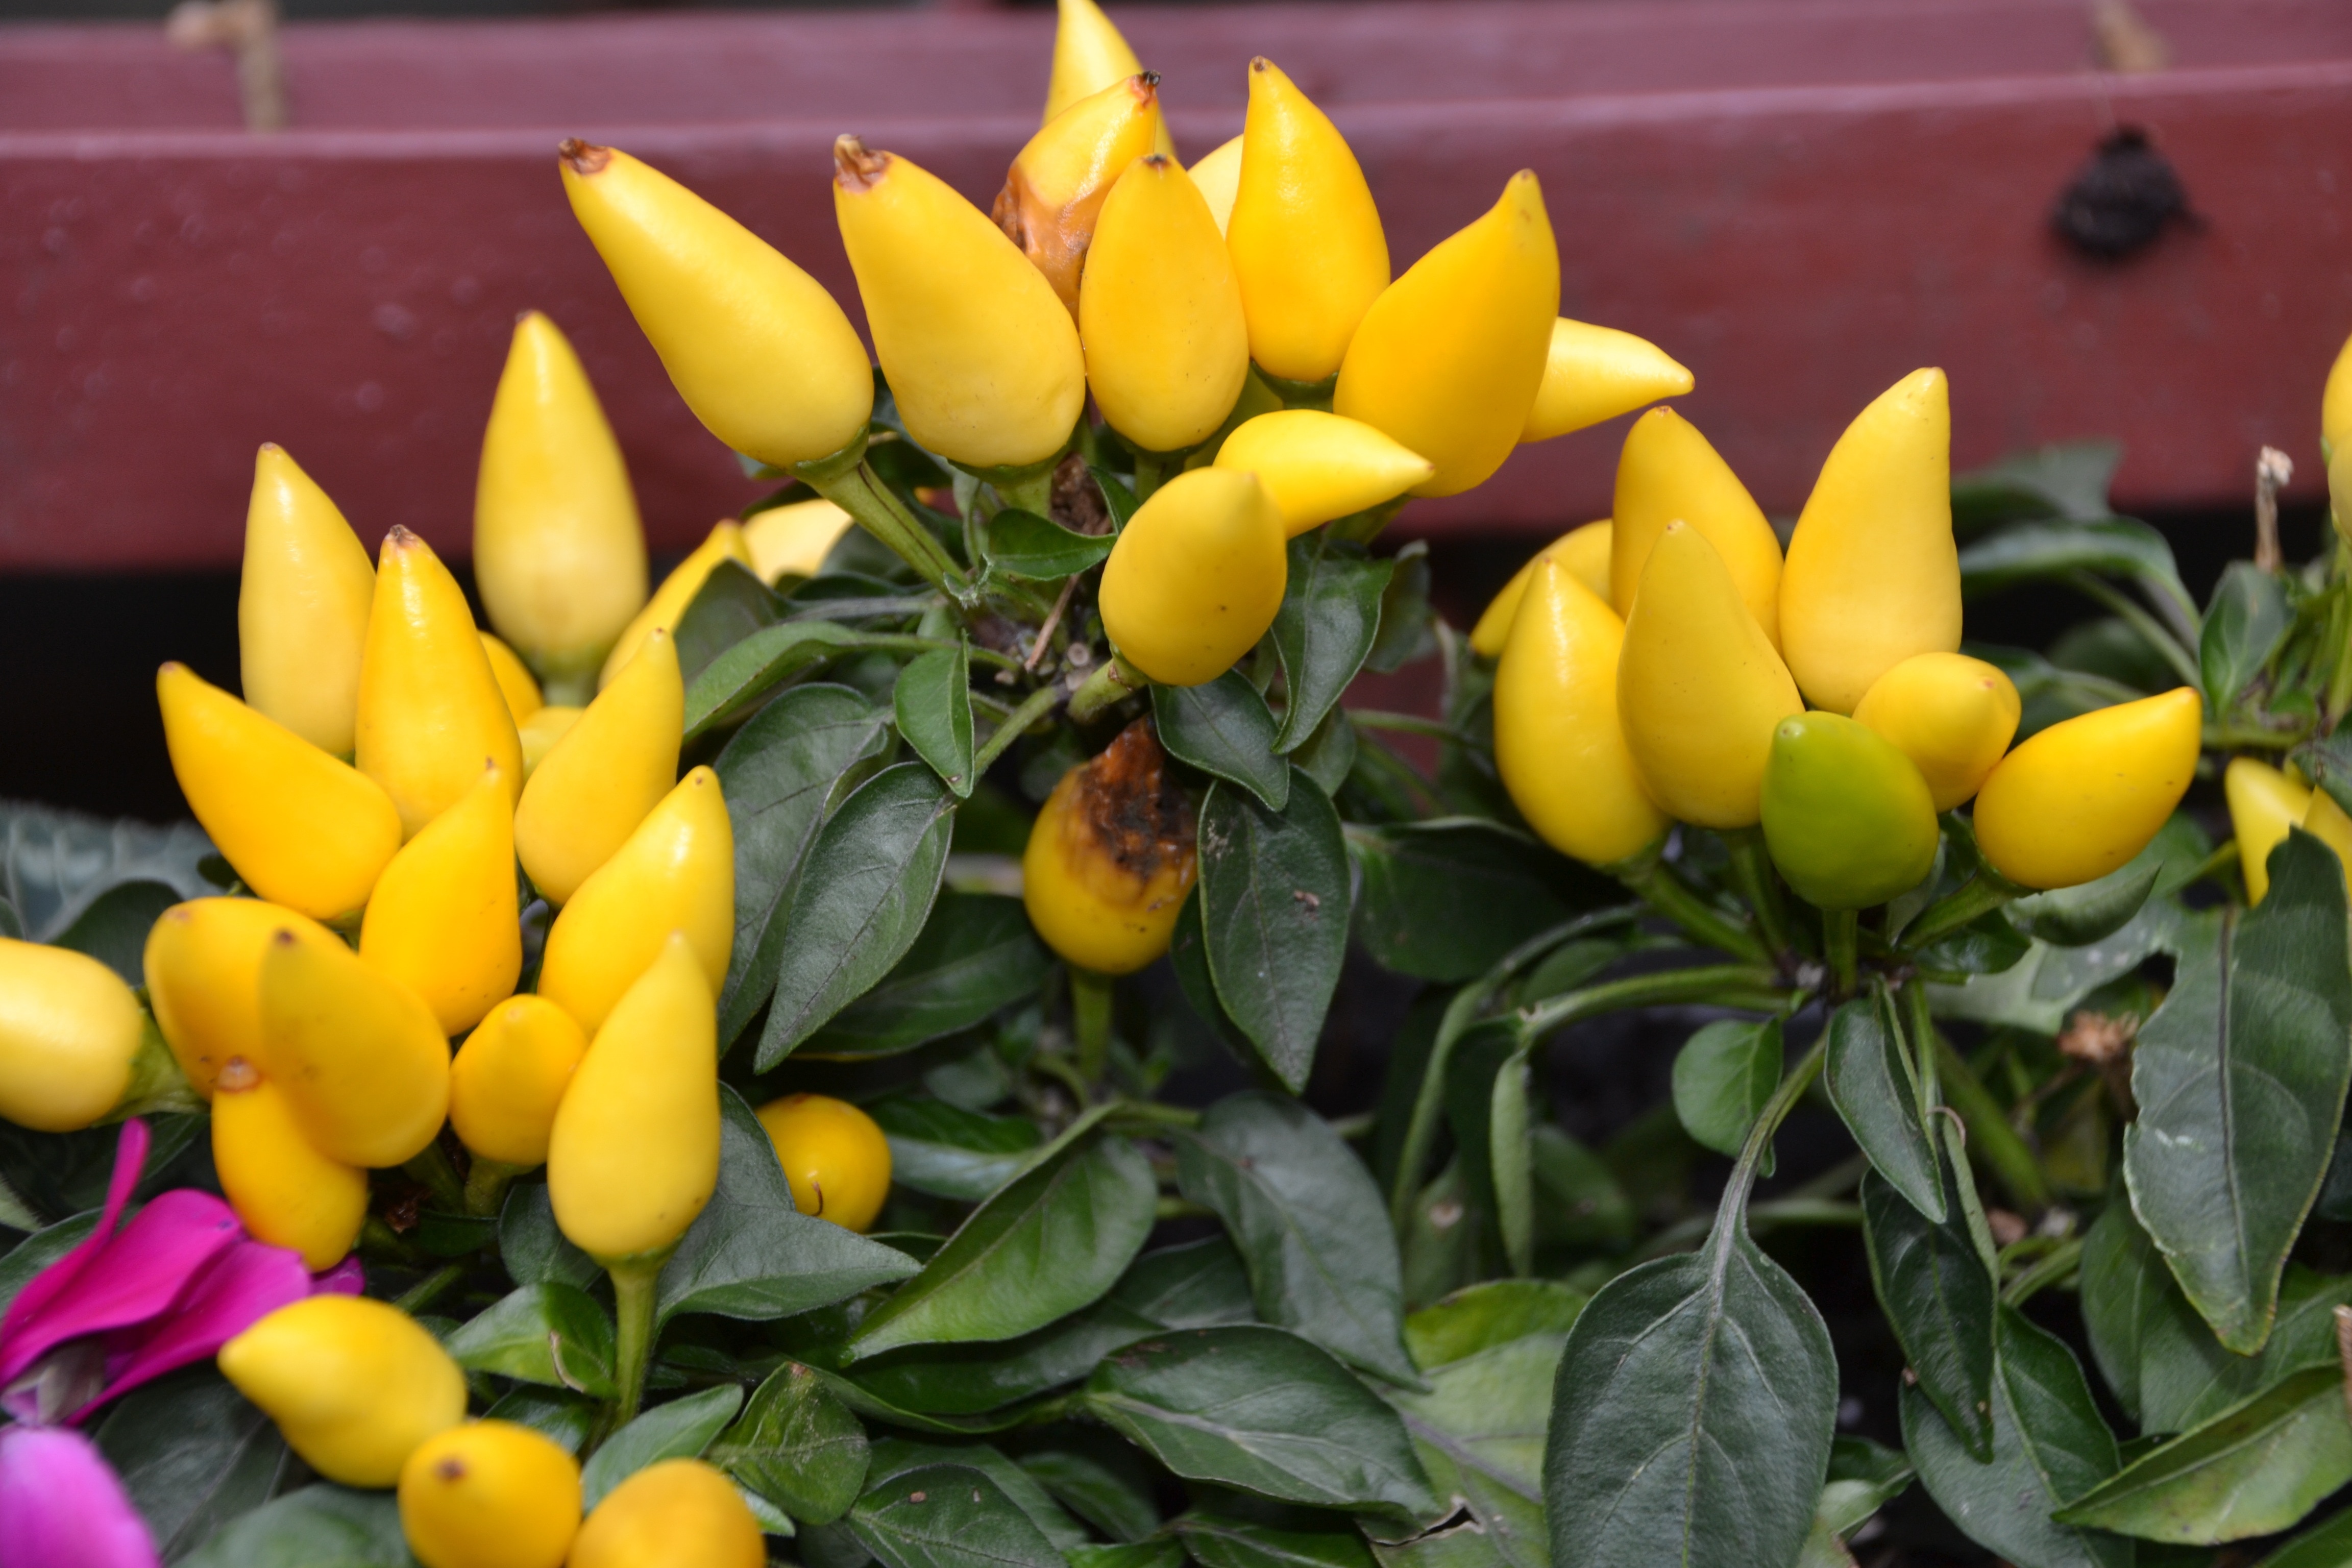 yellow peppers